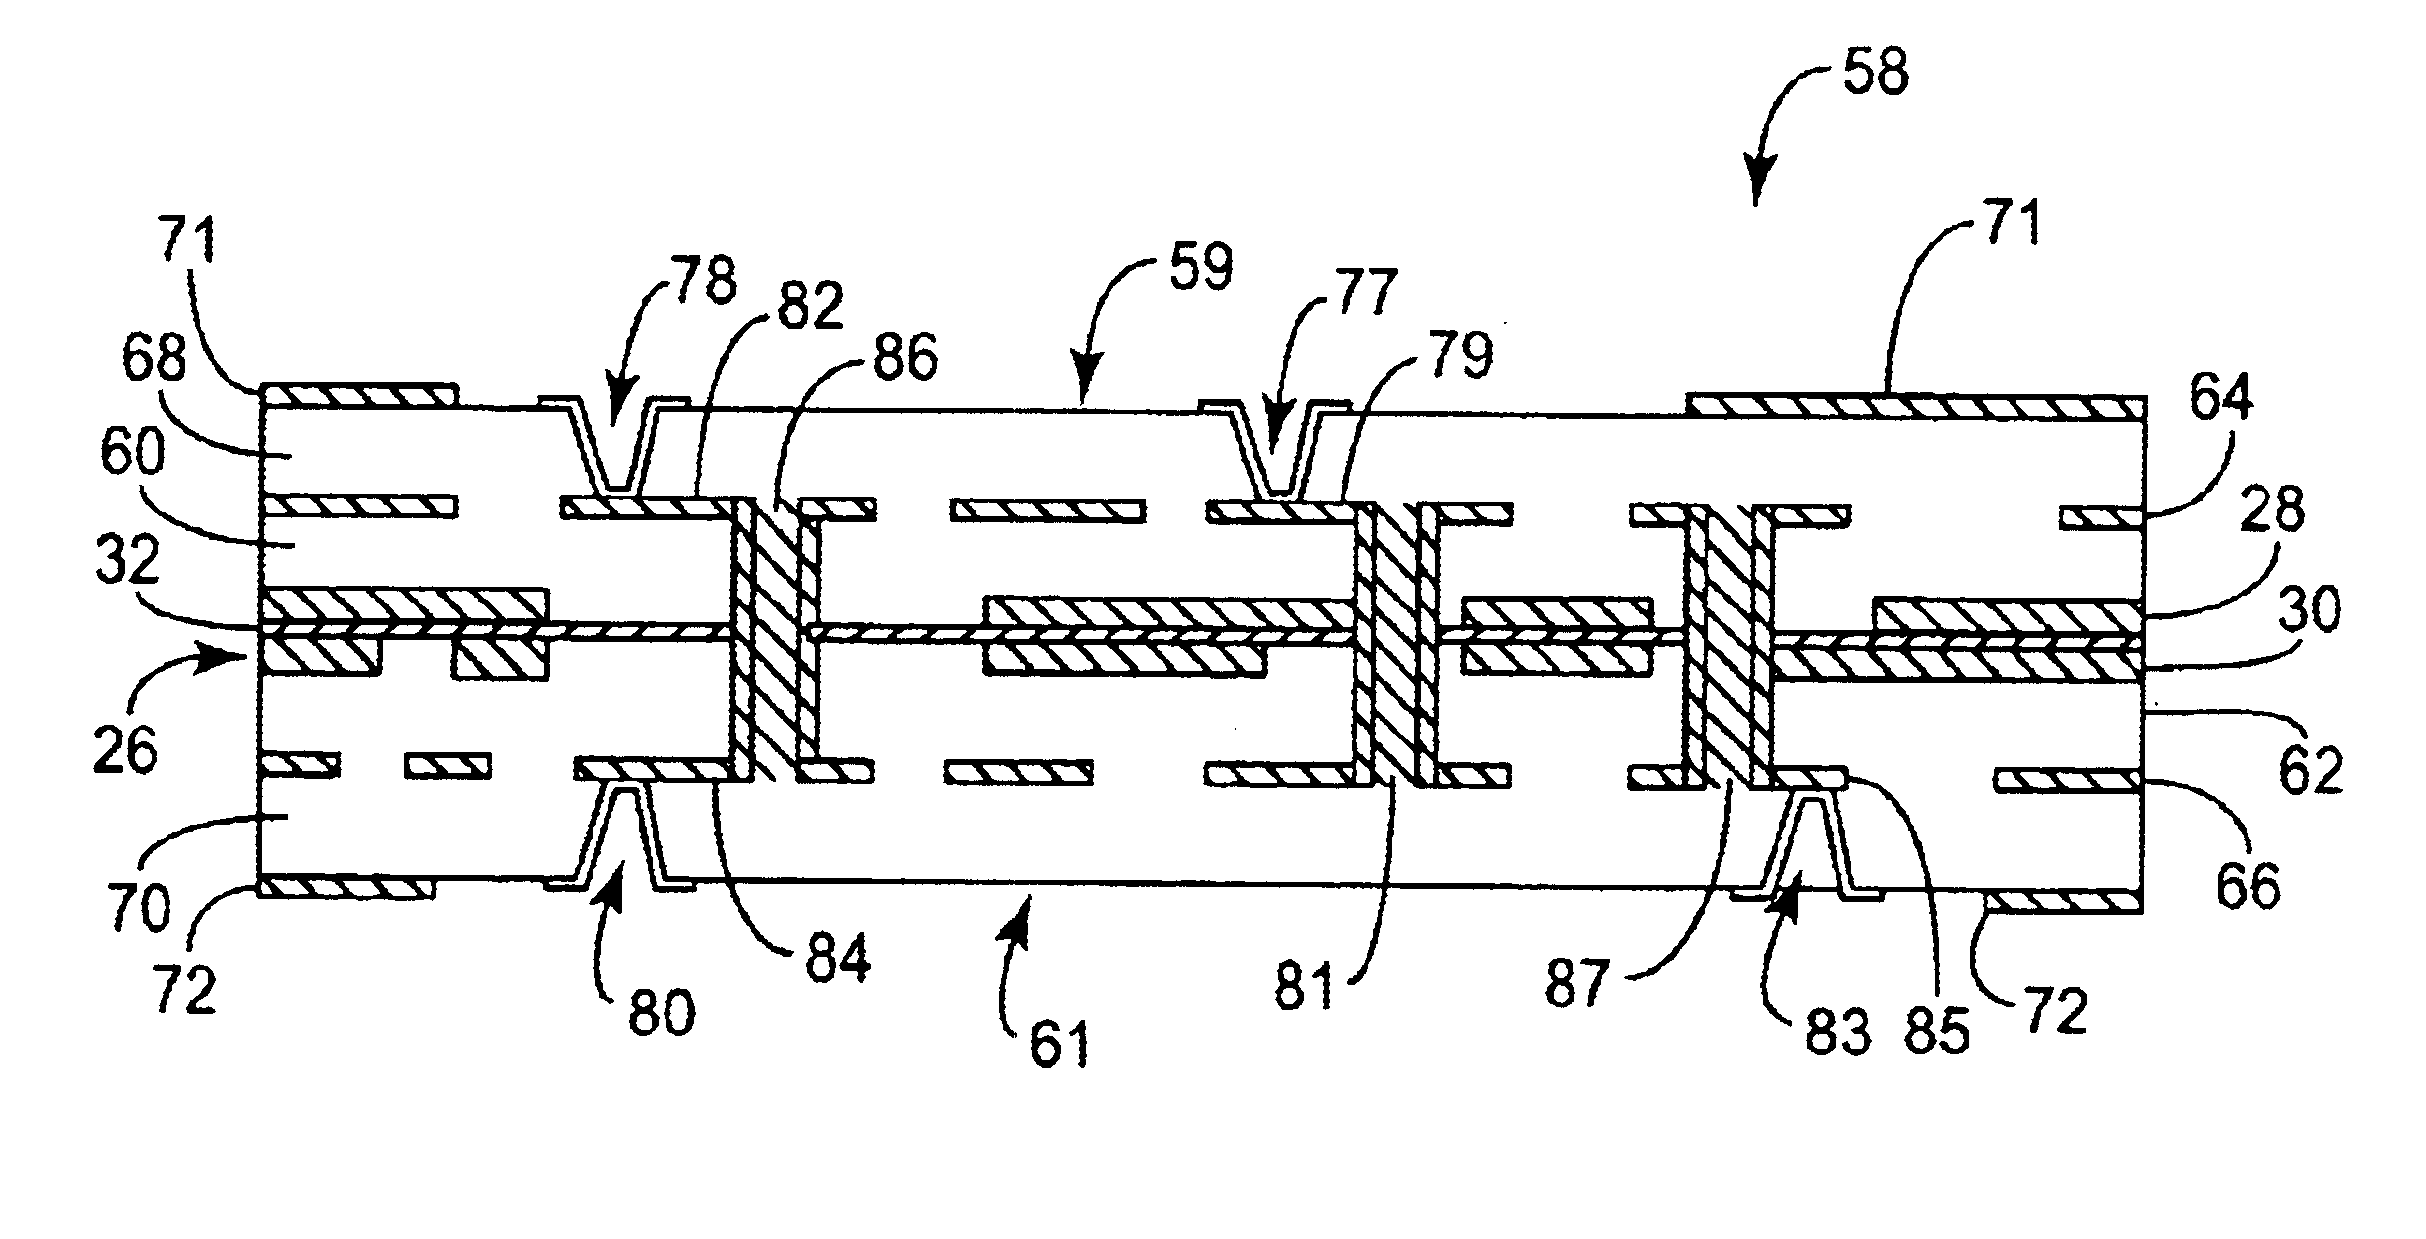 Interconnect module with reduced power distribution impedance